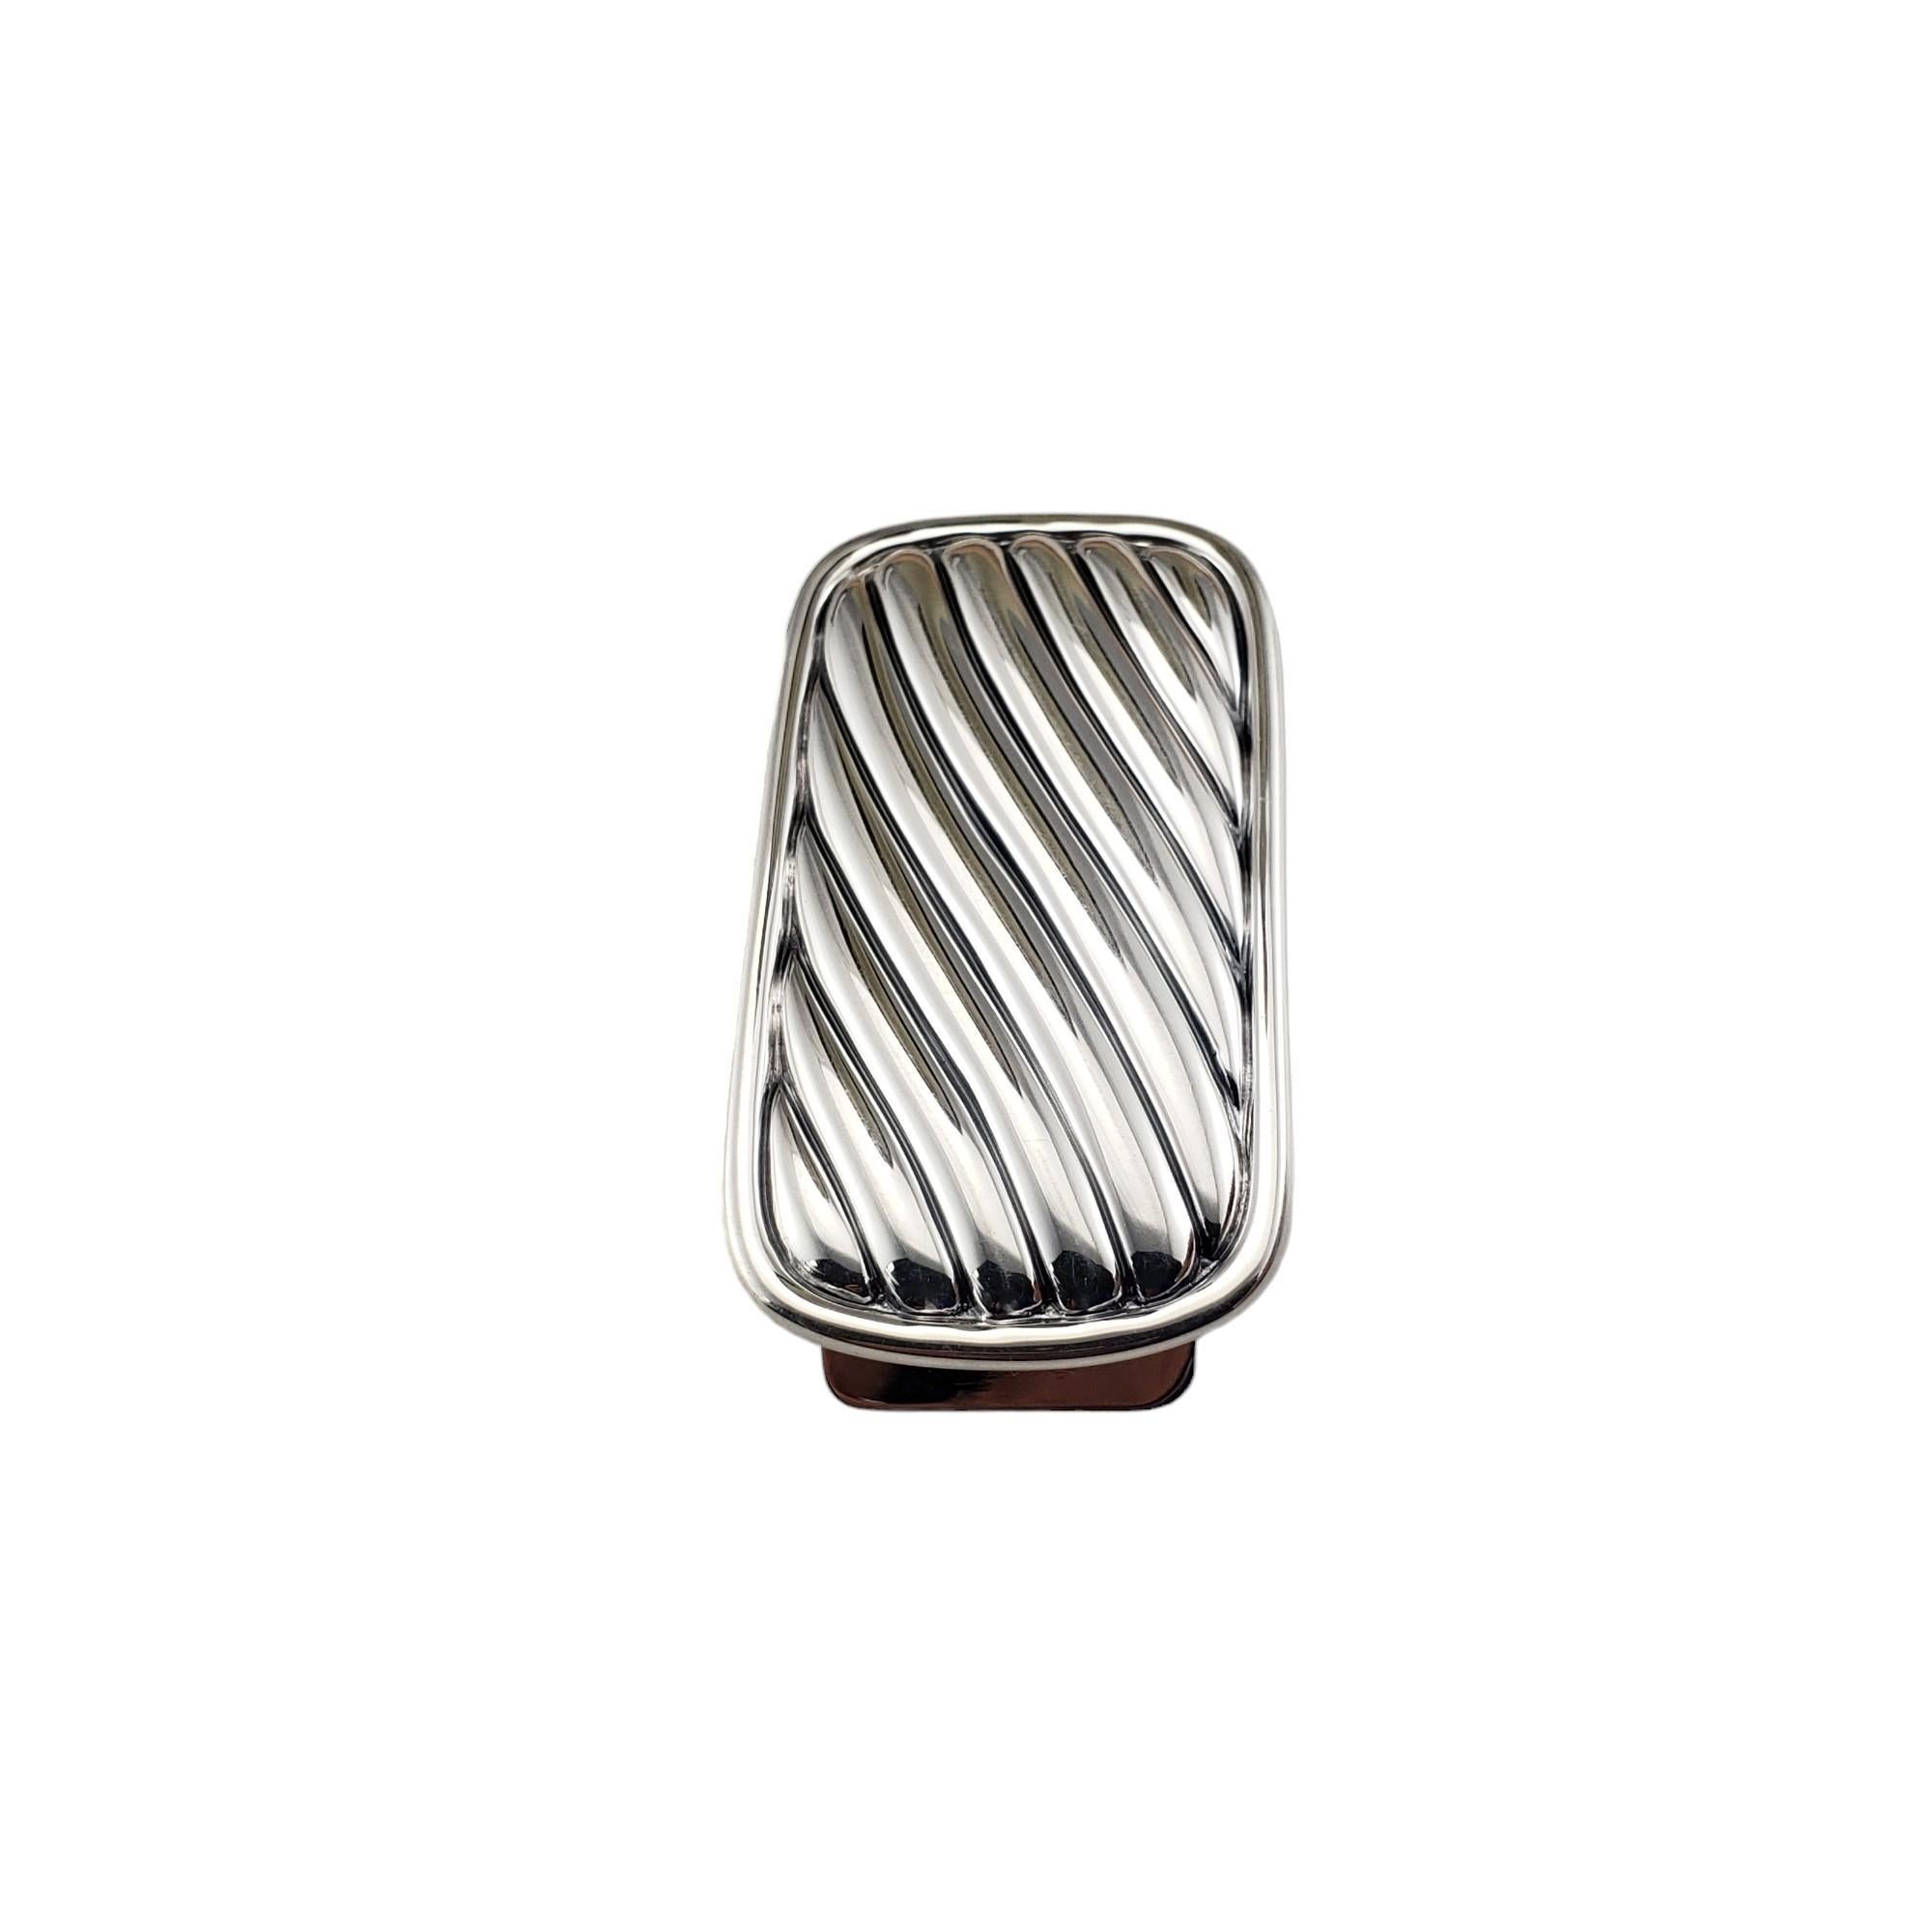 David Yurman Sterling Silver Money Clip #15639 In Good Condition For Sale In Washington Depot, CT